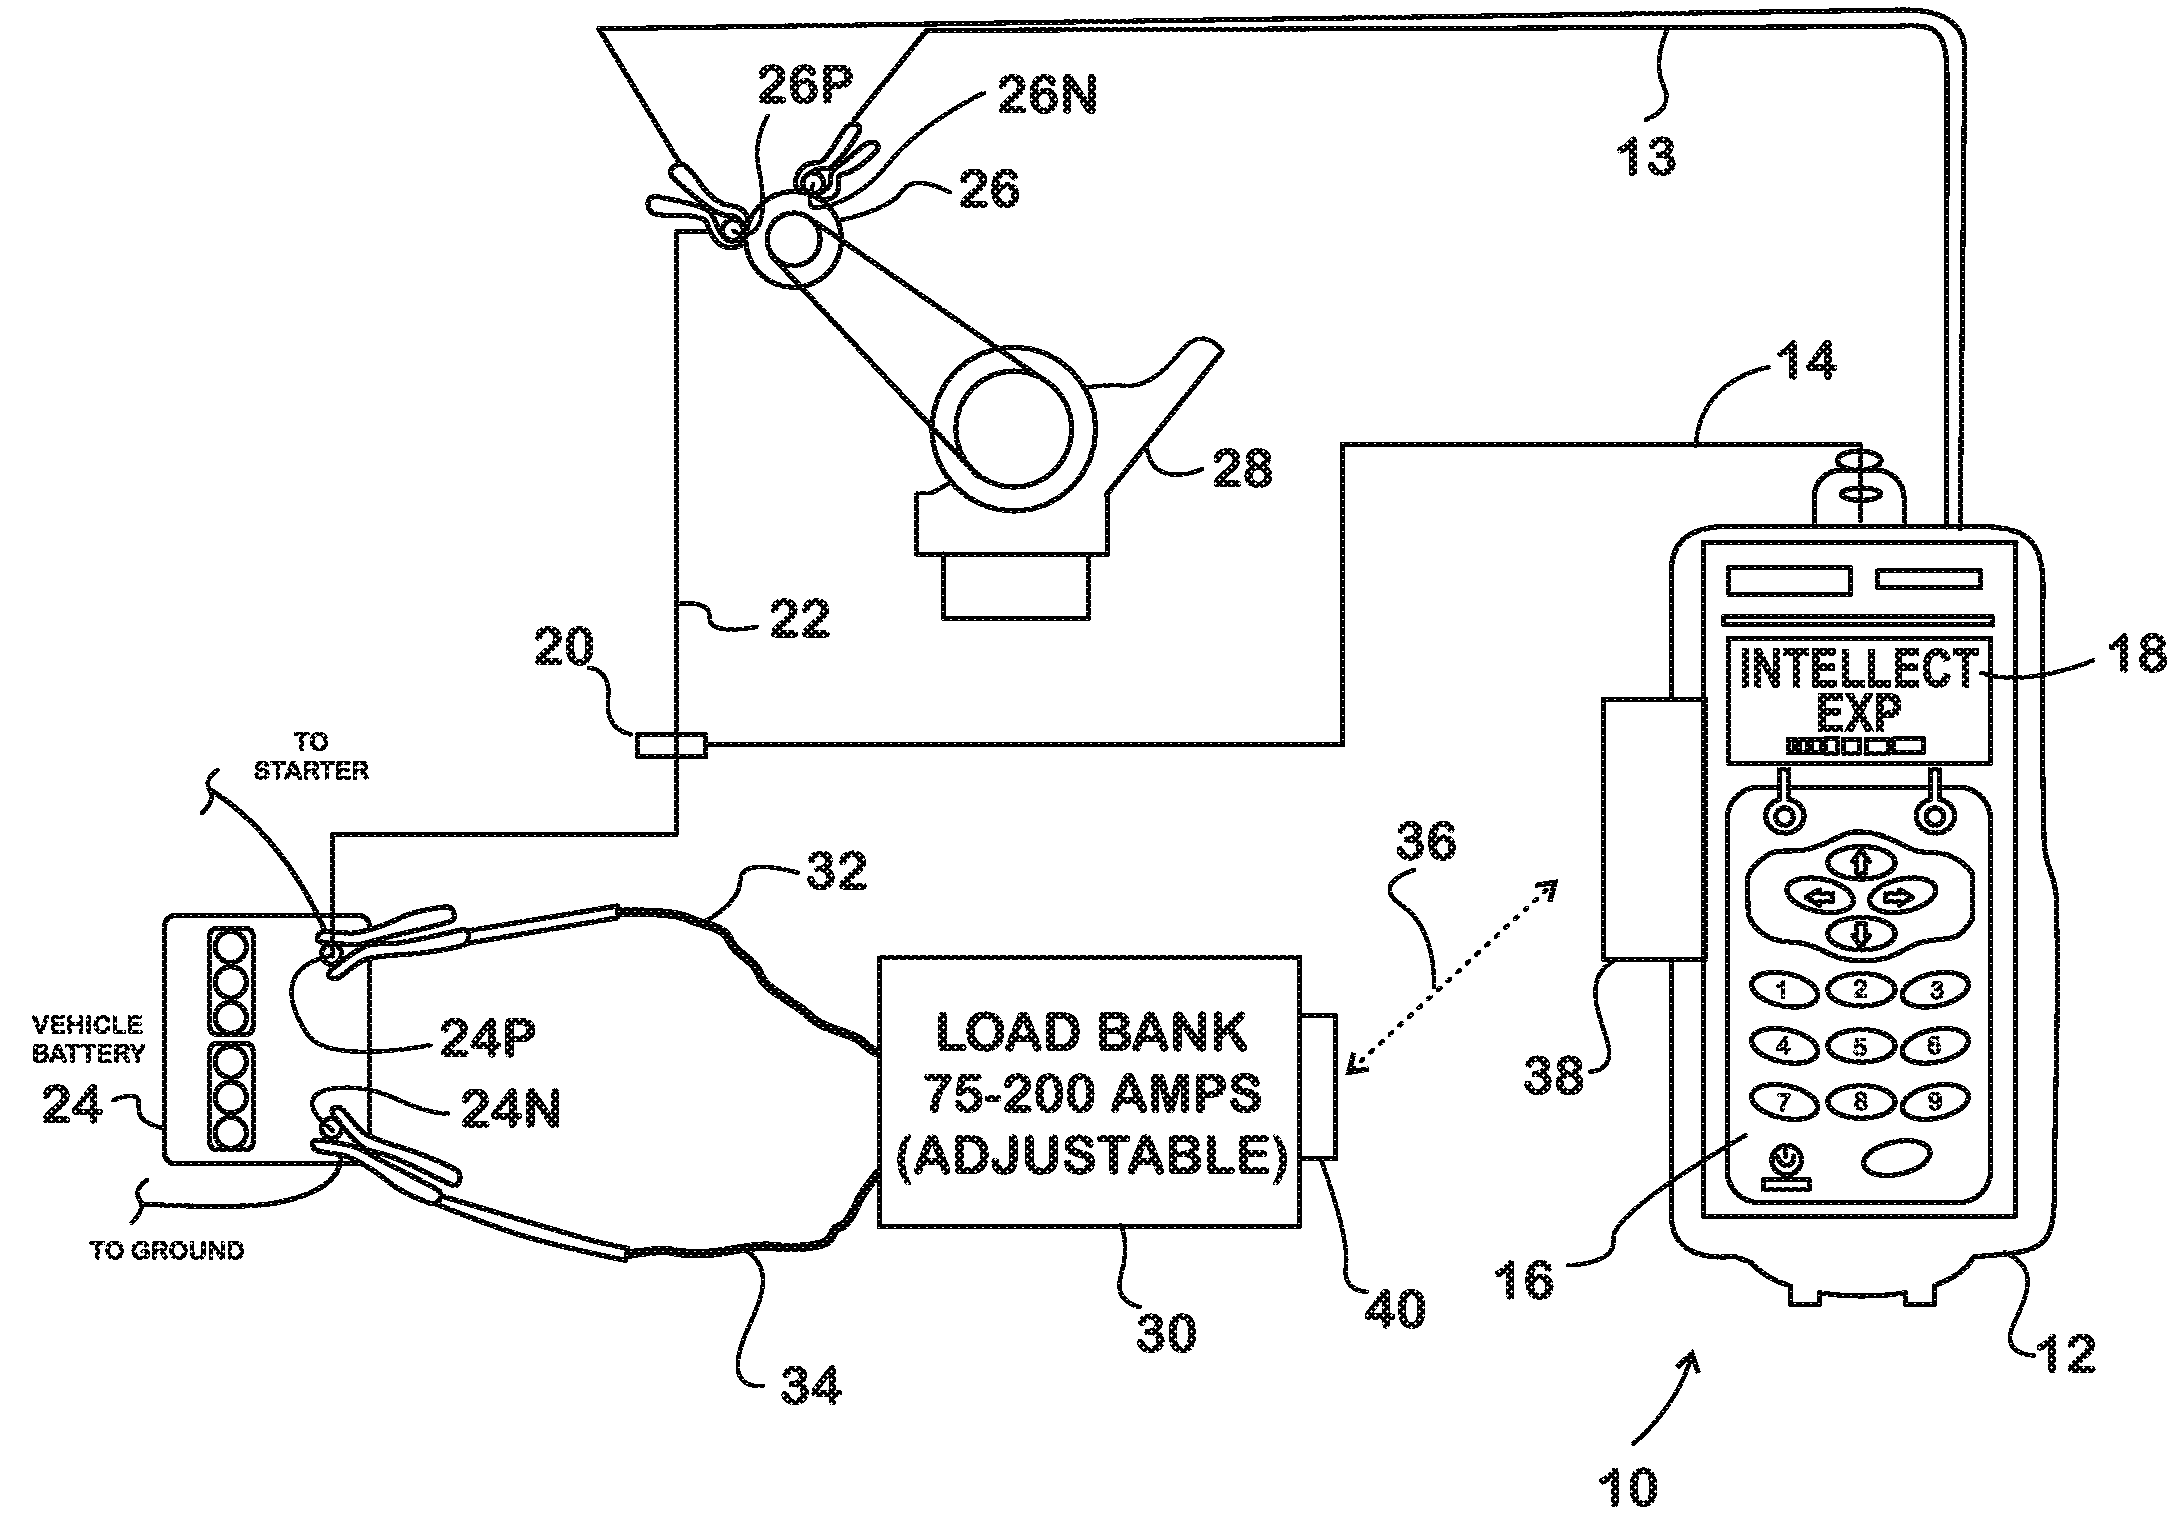 Electrical system testing using a wireless-controlled load bank